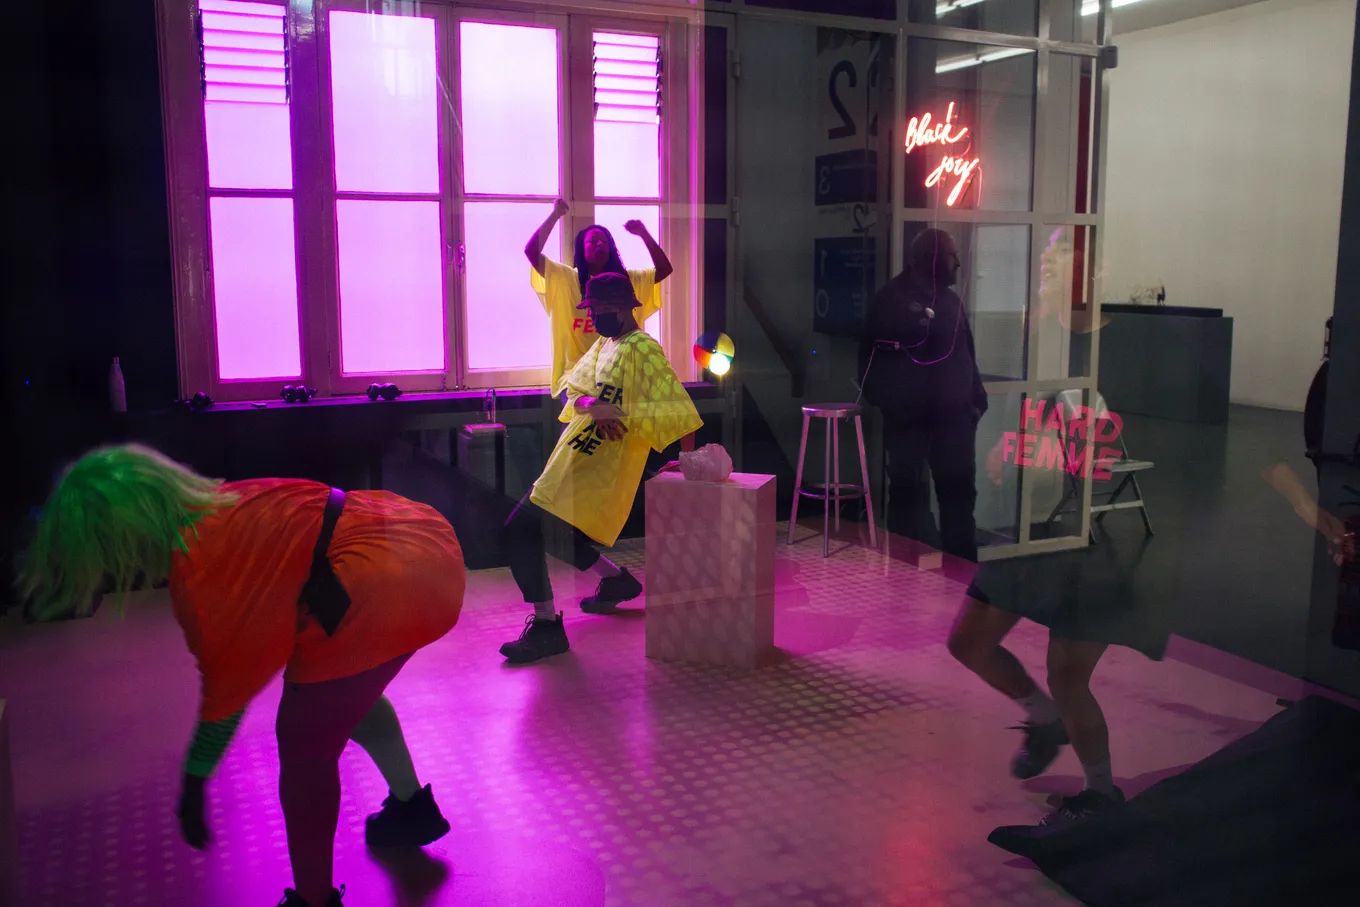 Performers dancing in the exhibition space, with a 'Black Joy' neon light on the back wall. A performer wears a tshirt with the text 'Hard Femme'.